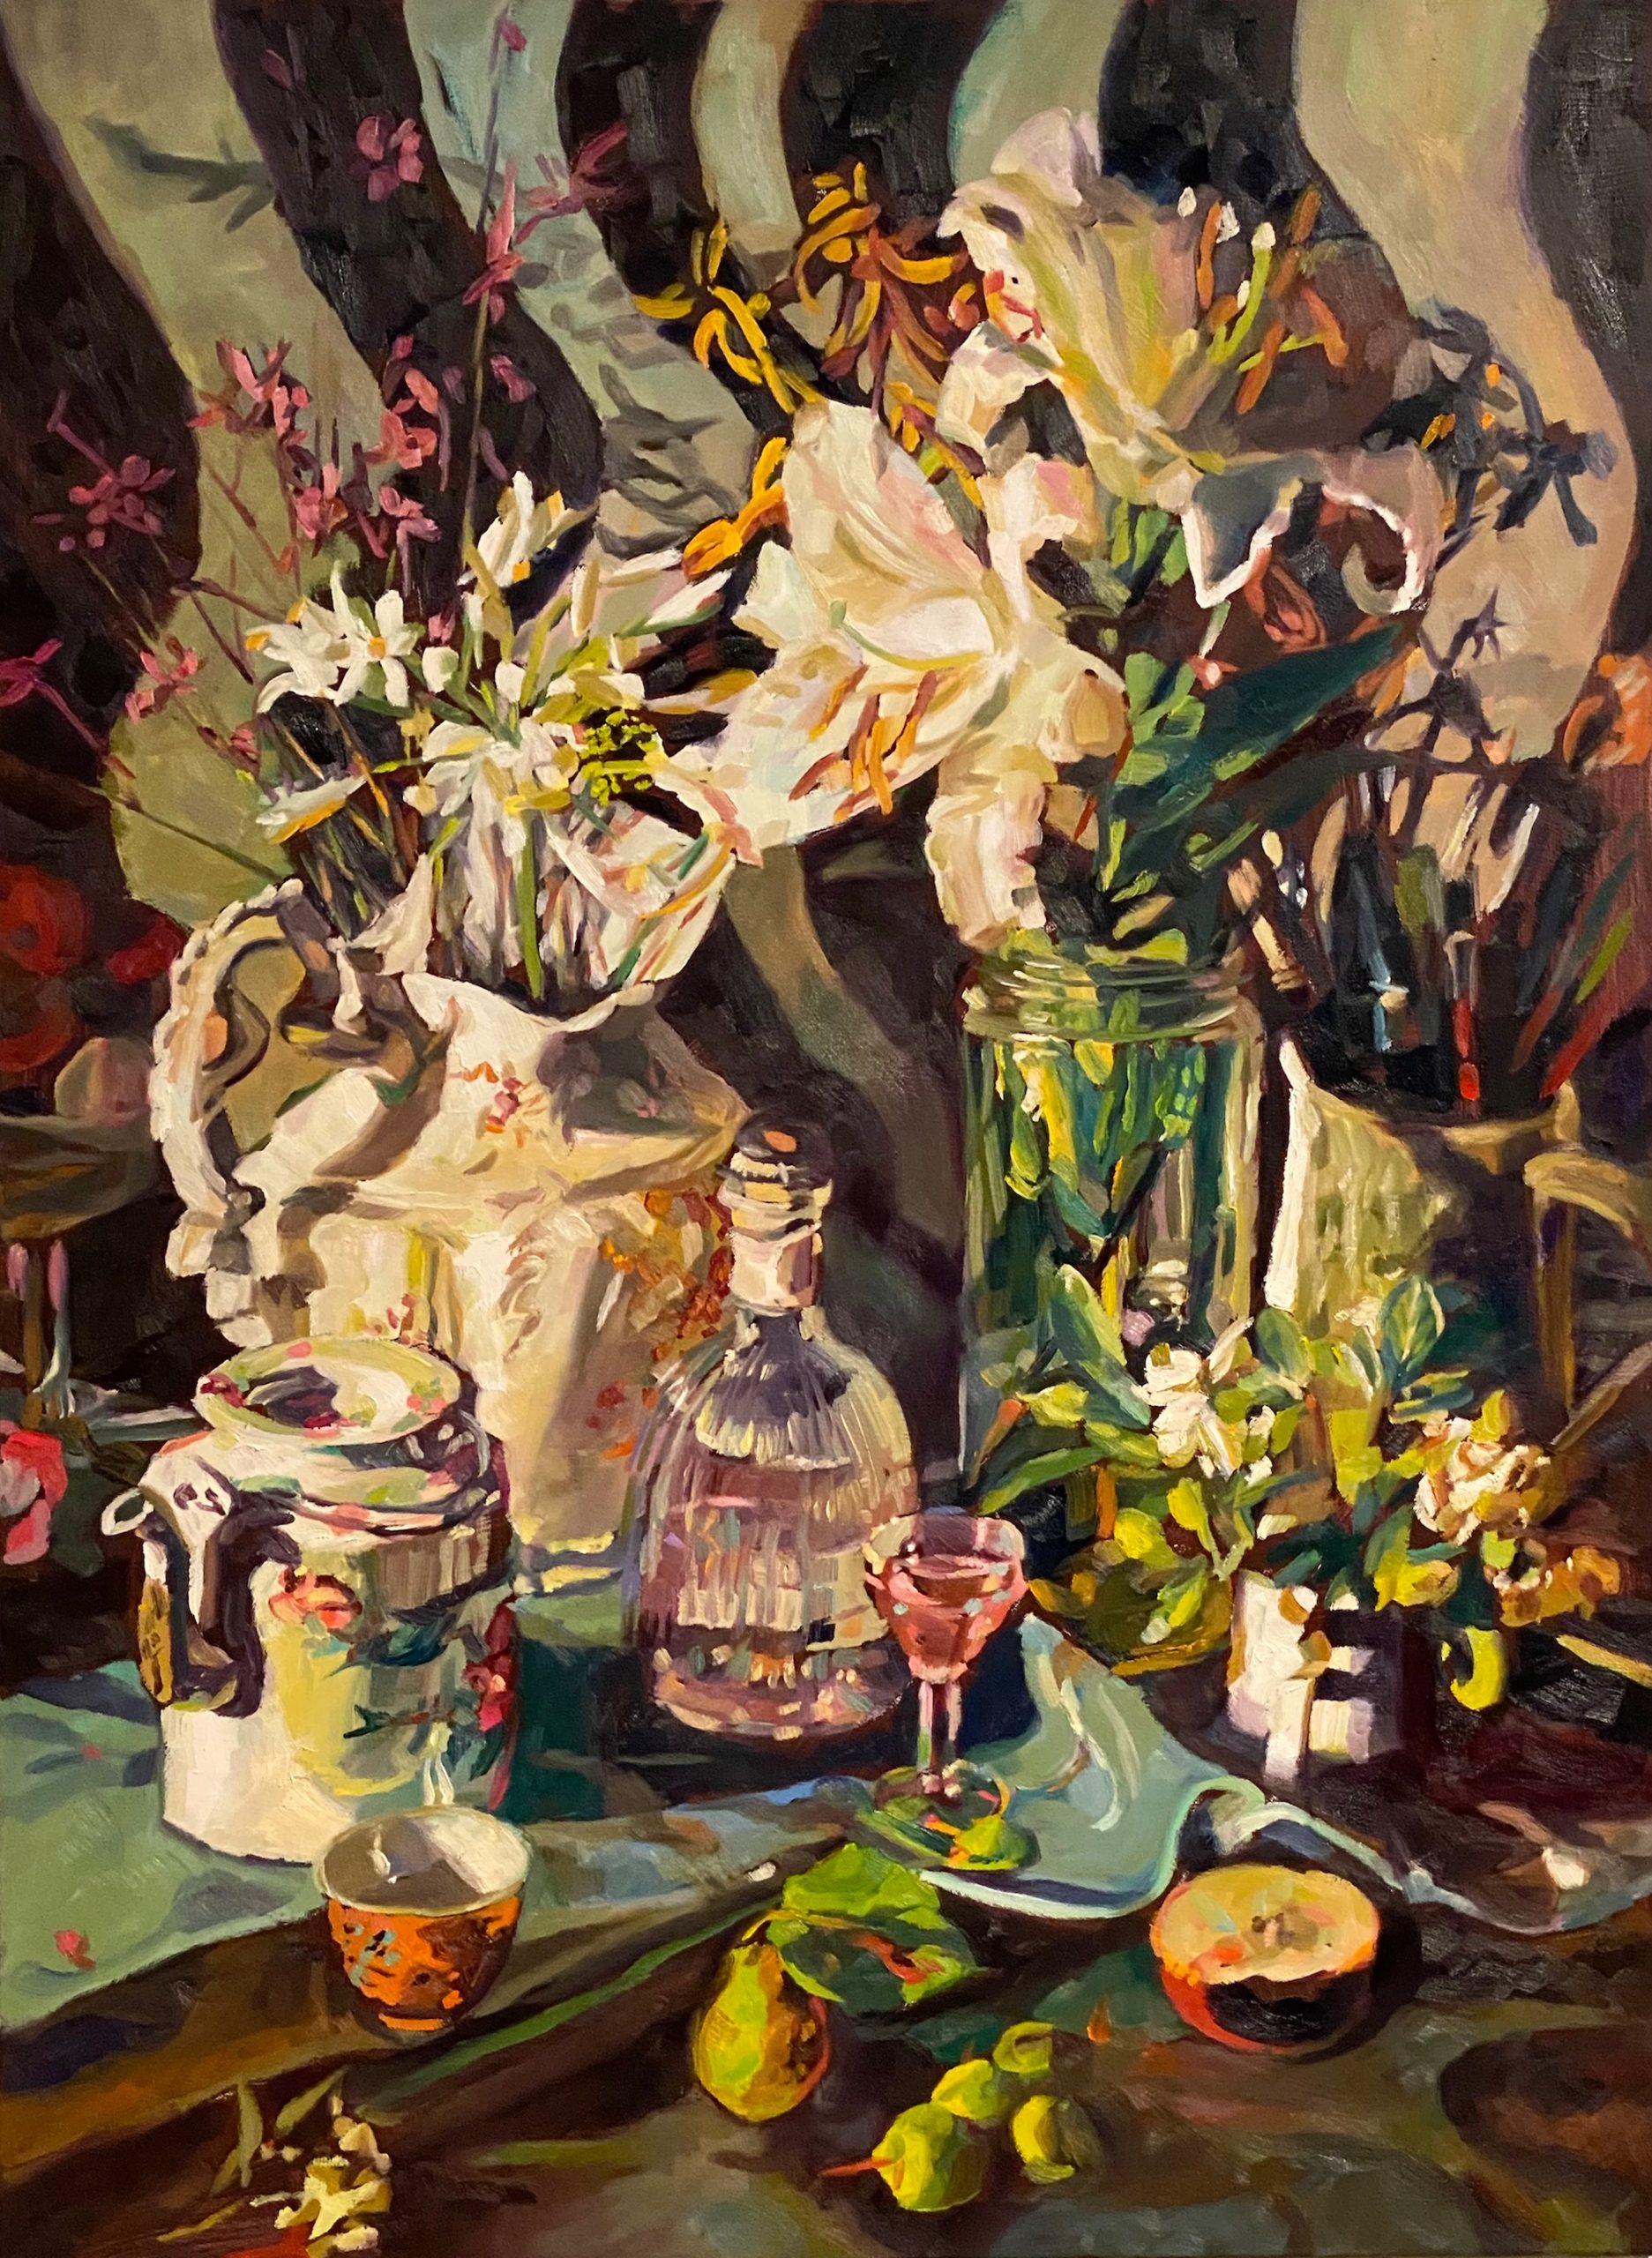 Rosemary Valadon 'Pink Gin, Green Tea' oil on canvas 122 x 91cm SOLD